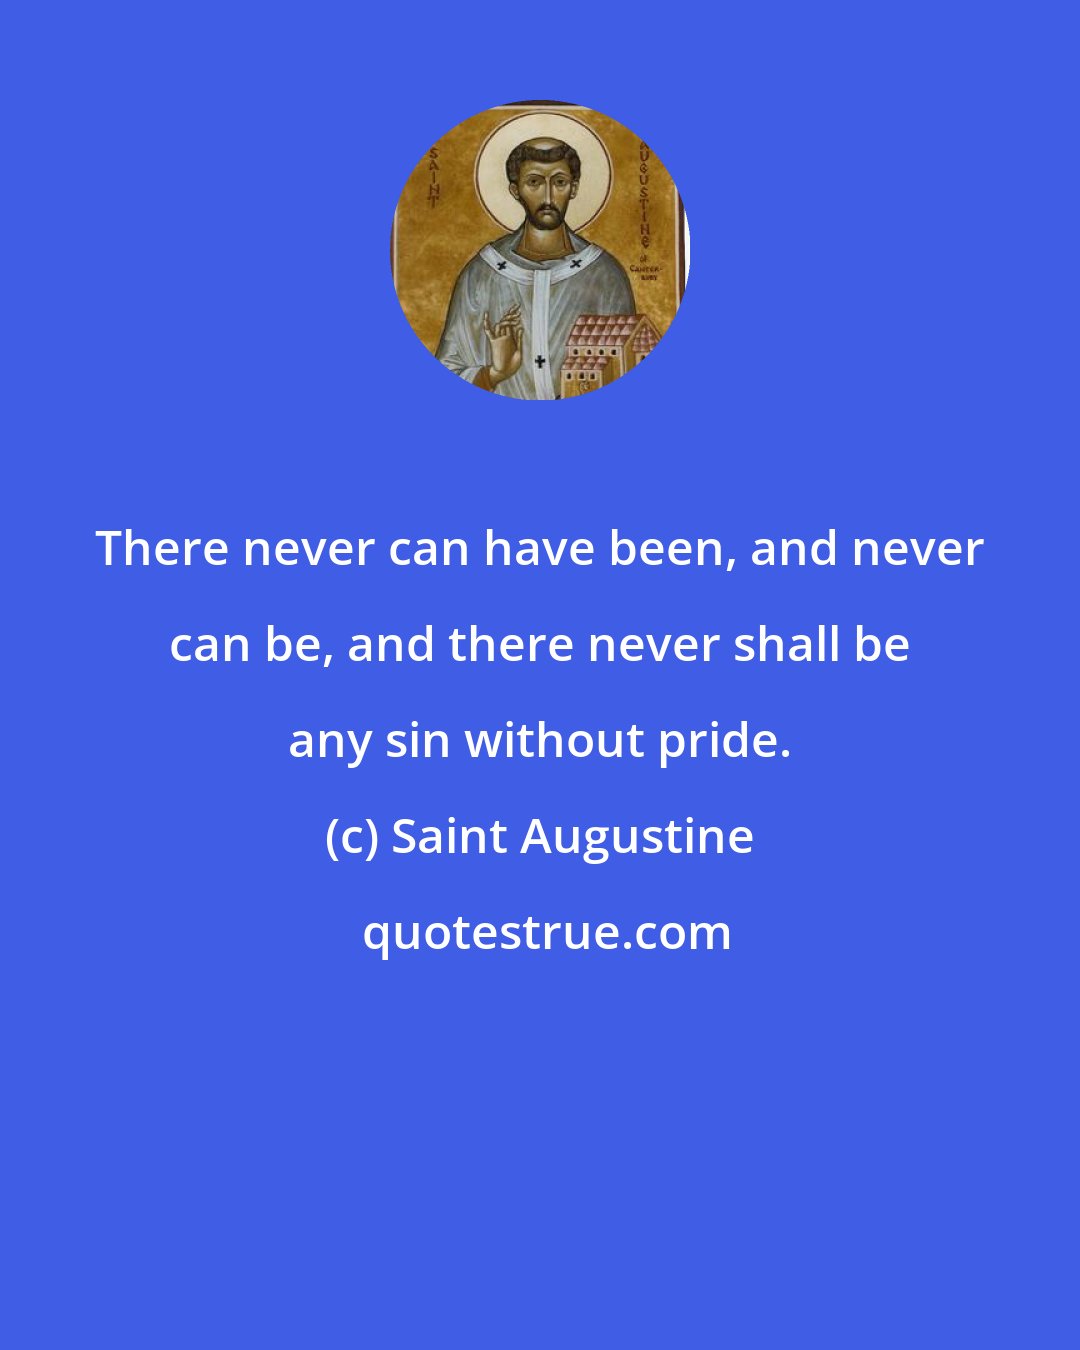 Saint Augustine: There never can have been, and never can be, and there never shall be any sin without pride.